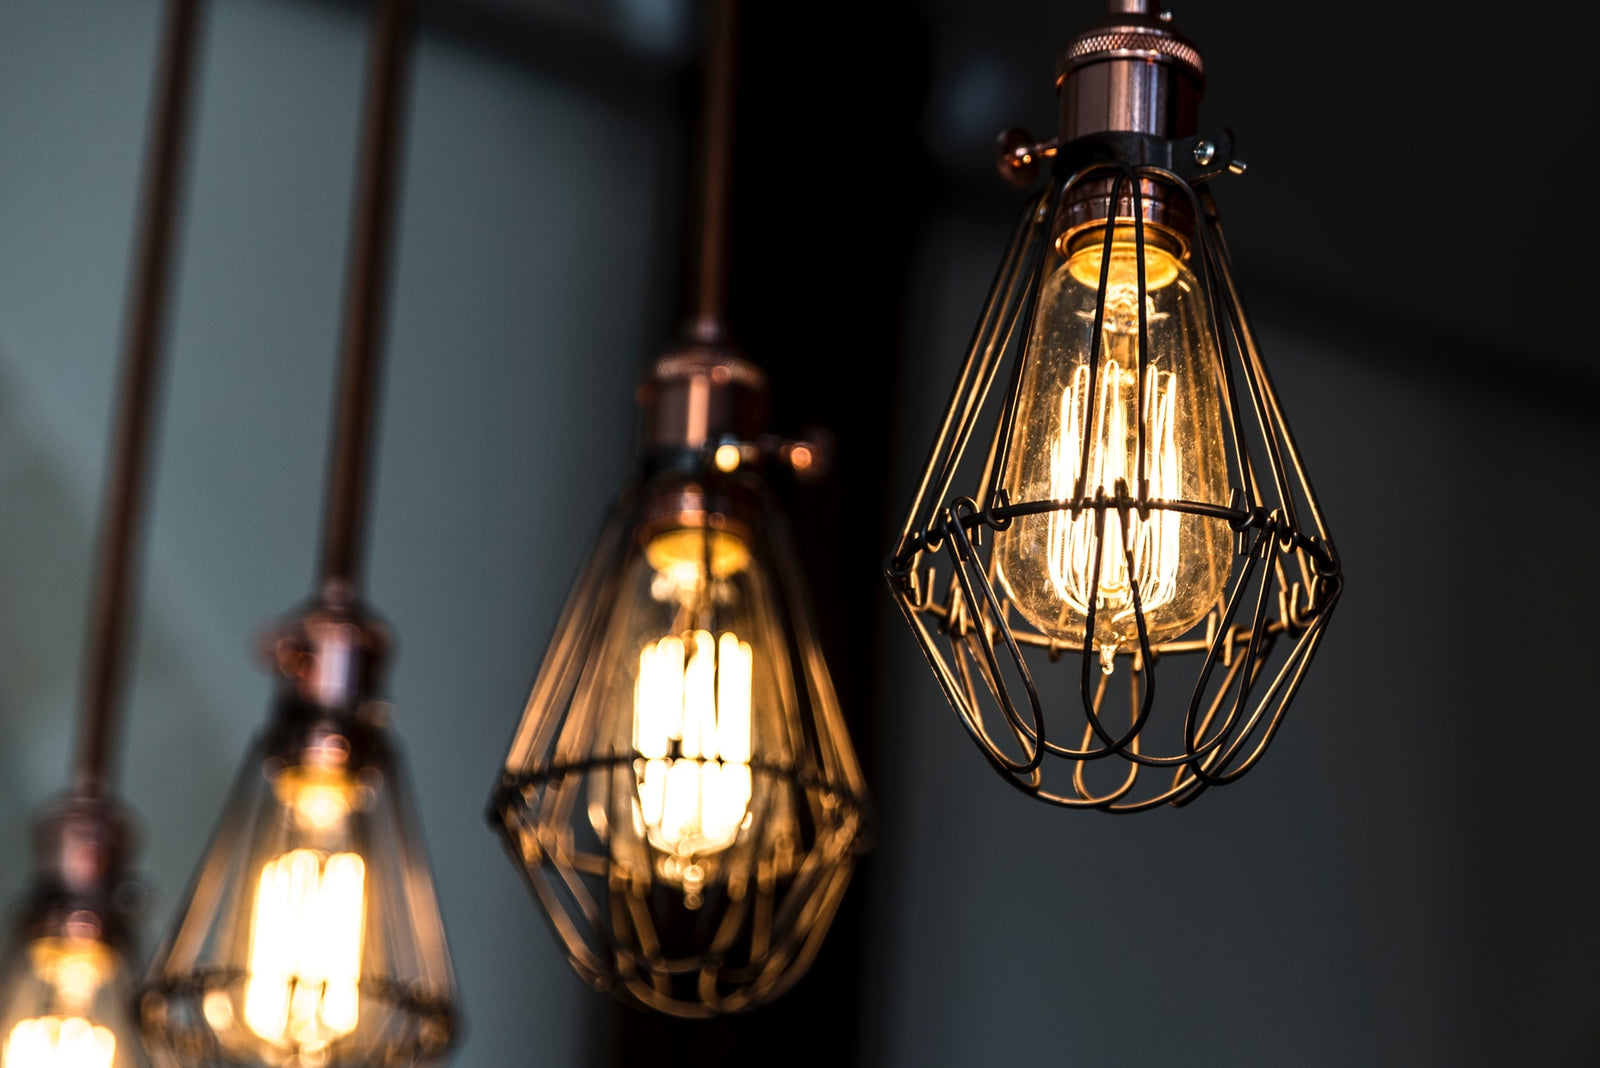 5 Advantages Vintage LED Bulbs Have Over Traditional Bulbs